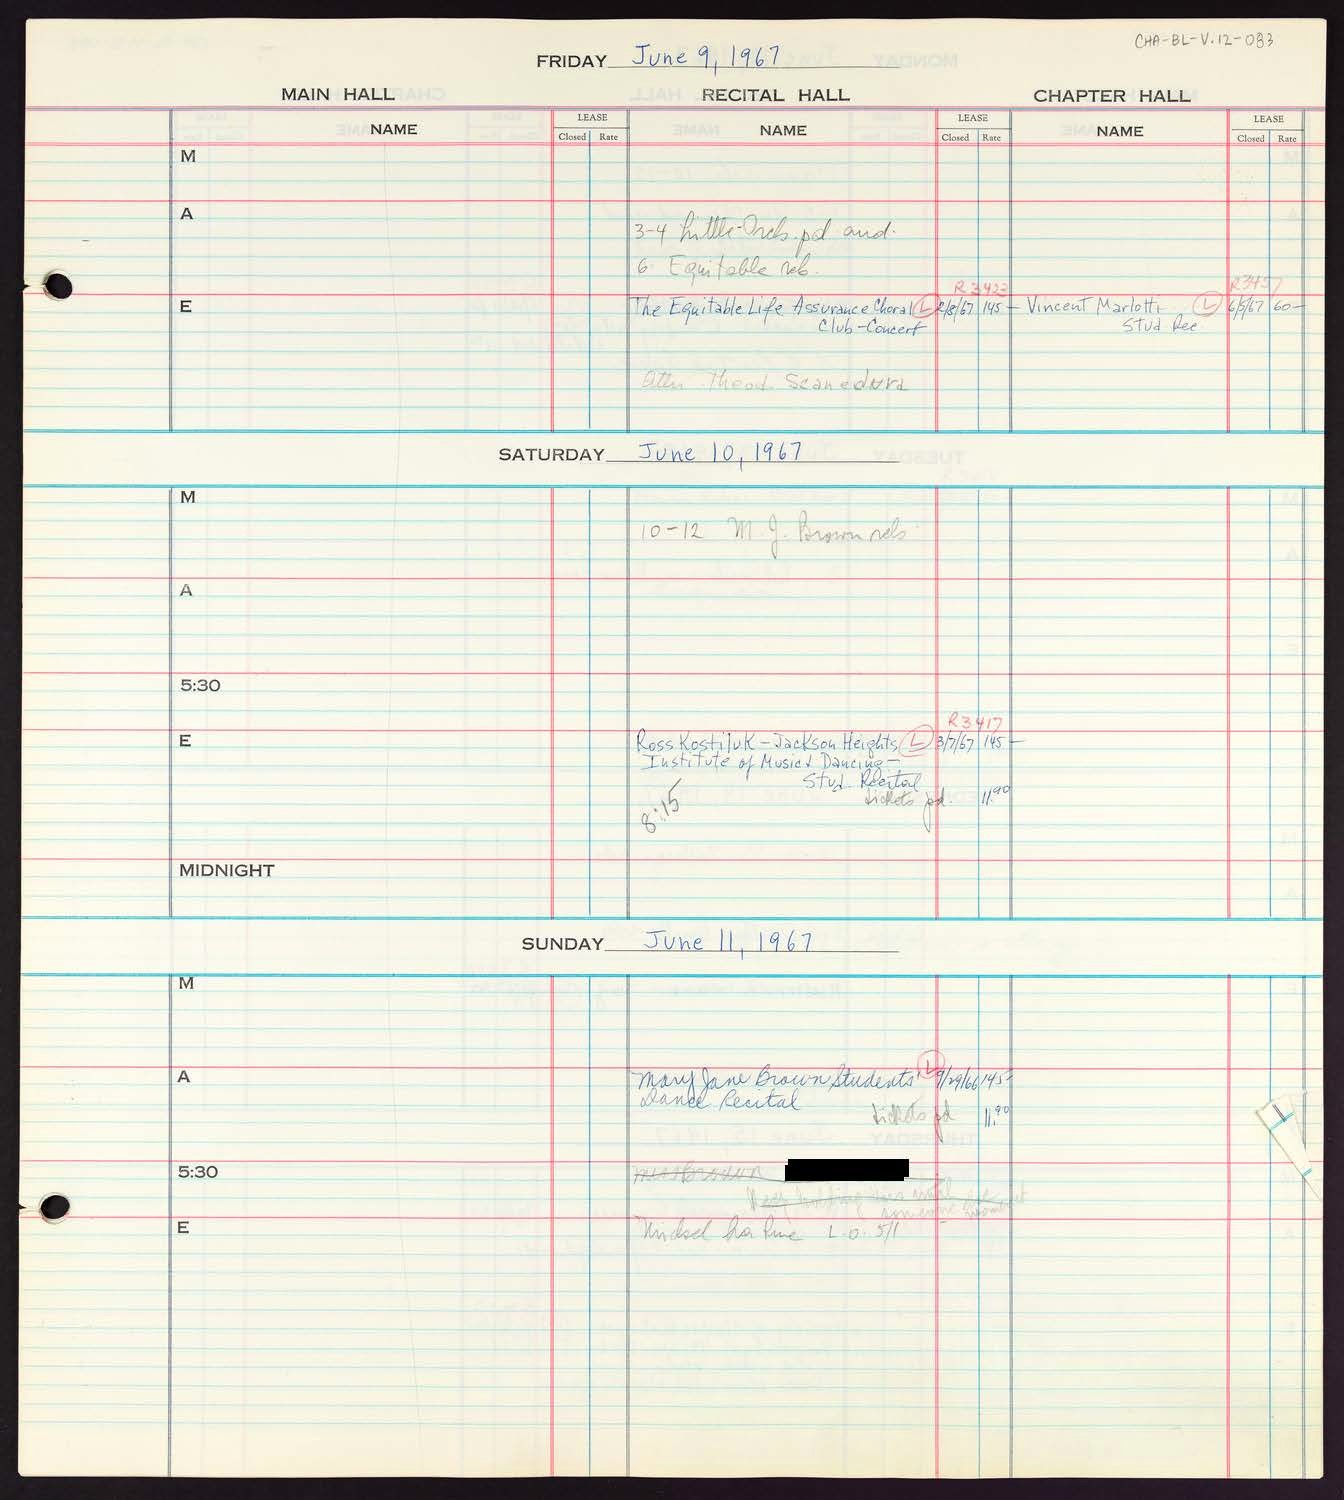 Carnegie Hall Booking Ledger, volume 12, page 83